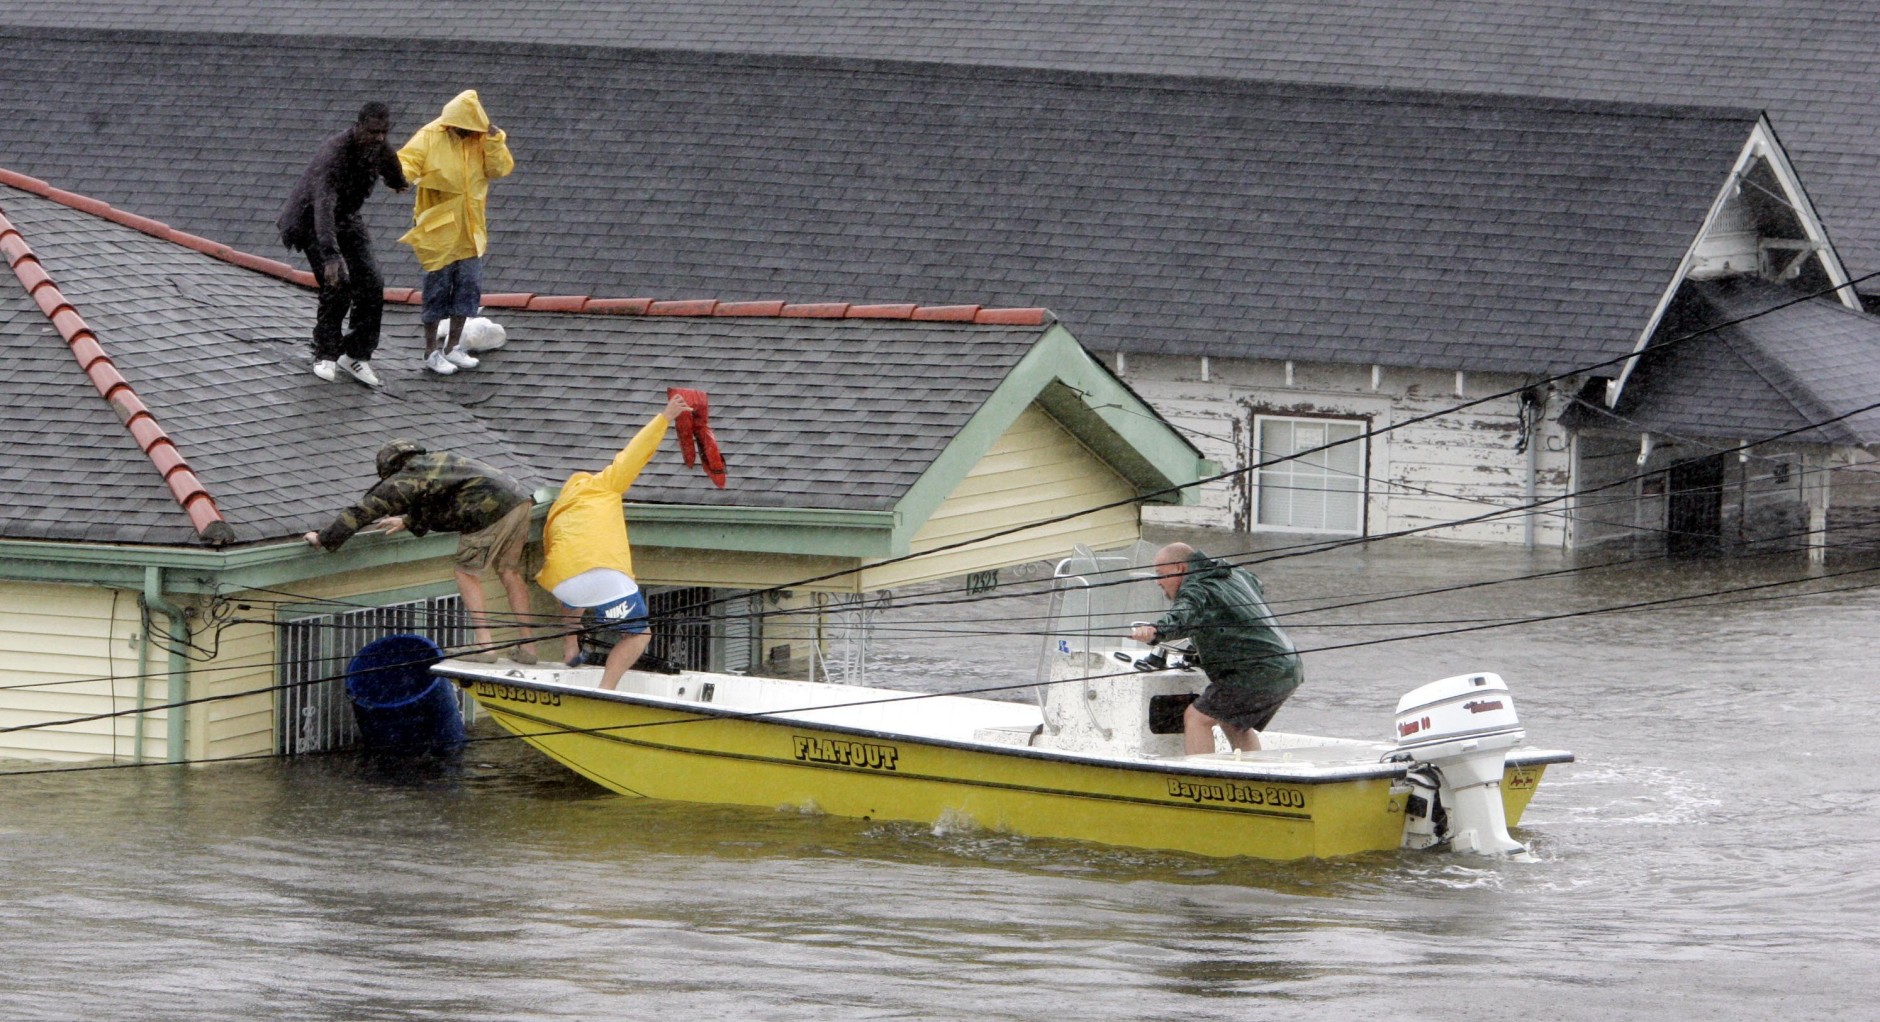 Bryan Vernon and Dorothy Bell are rescued from their  rooftop after  Hurricane Katrina hit, causing flooding in their New Orleans neighborhood,  Monday Morning, Aug. 29,  2005. Officials called for a mandatory evacuation of the city, but many residents remained in the city.  (AP Photo/Eric Gay)